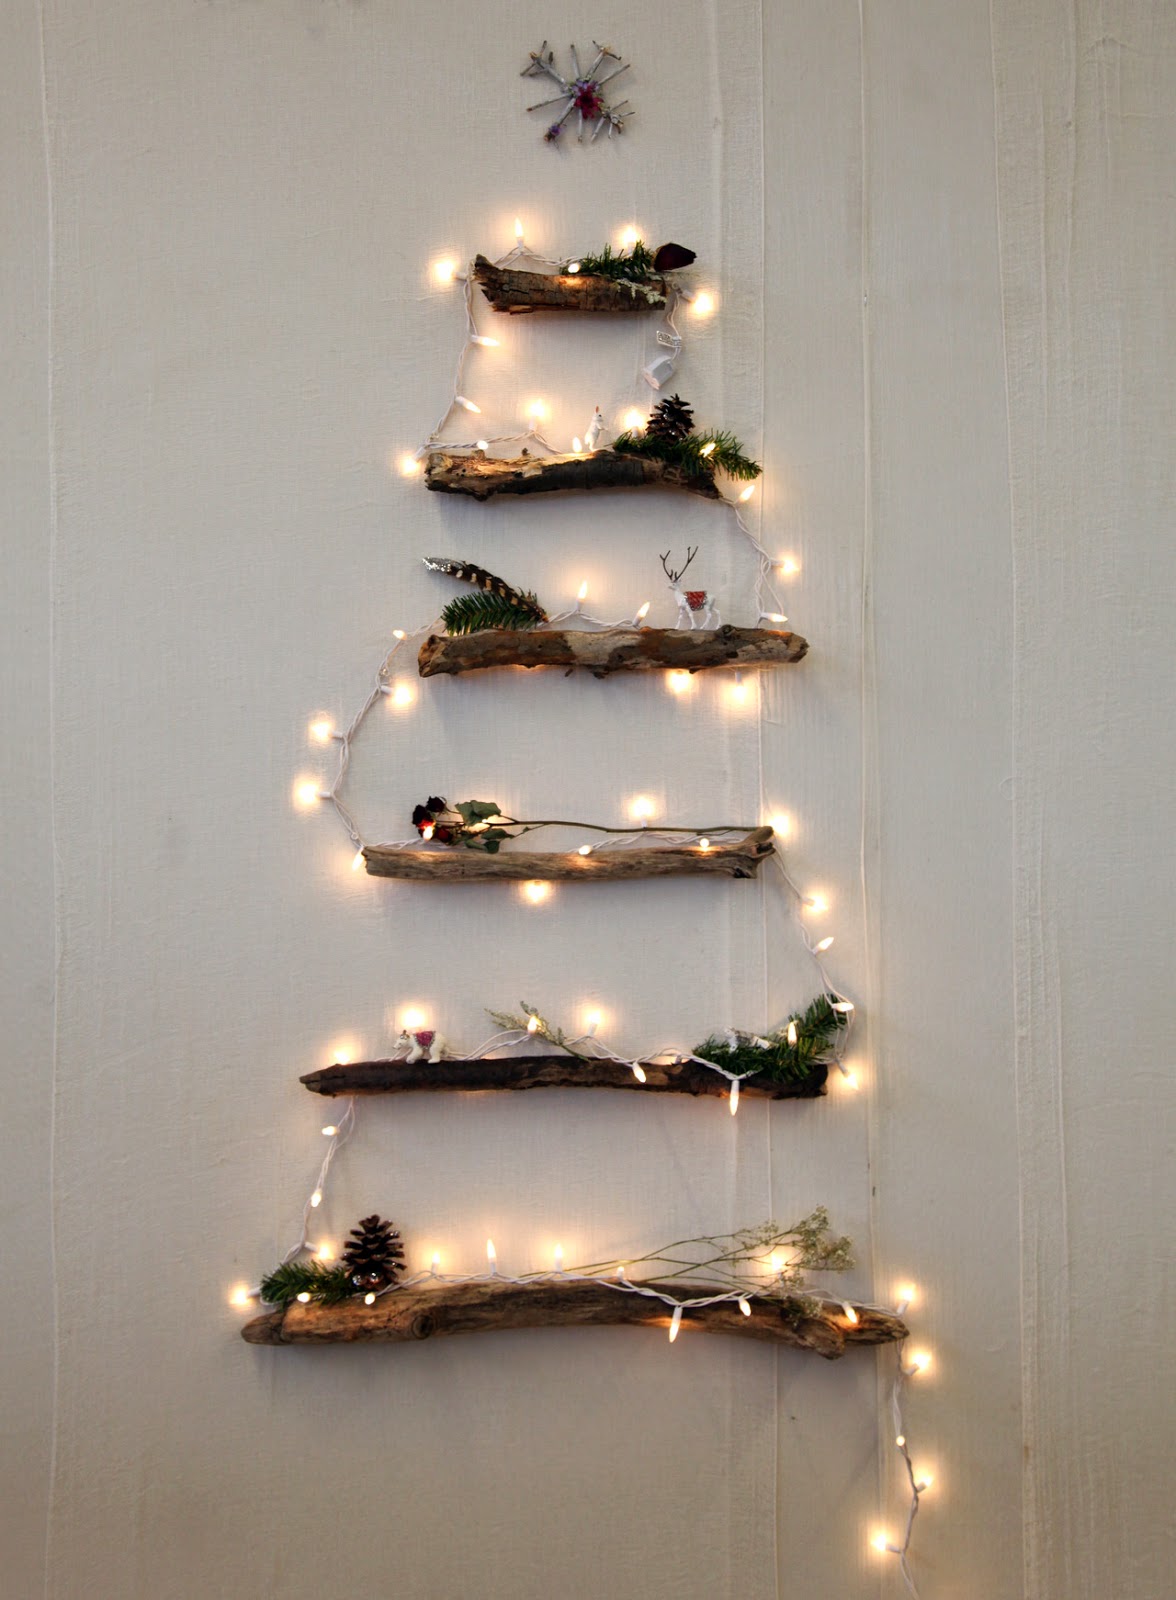 7 Ways To Decorate Your Home With Christmas Lights! 5